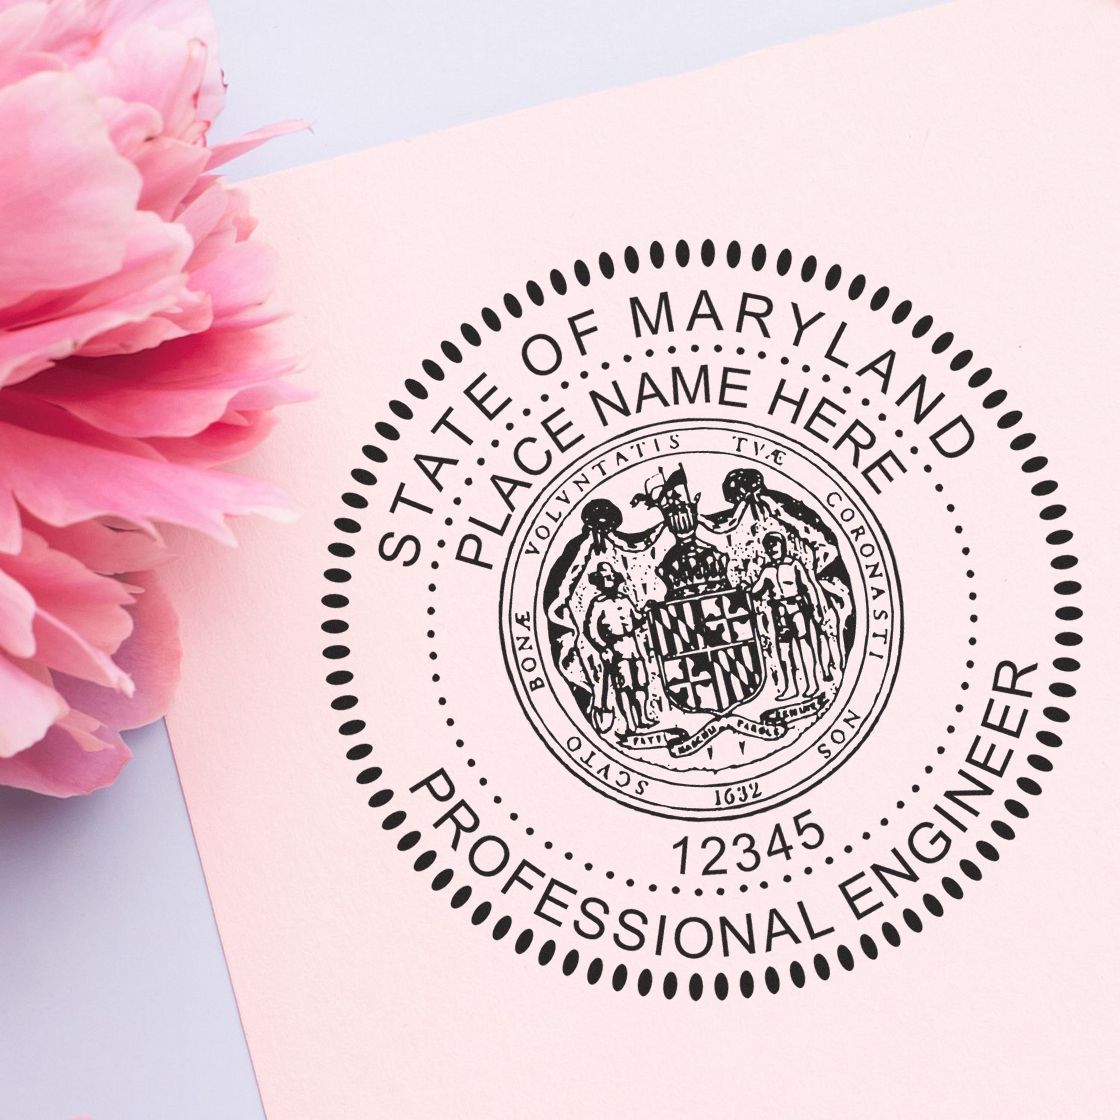 A stamped impression of the Self-Inking Maryland PE Stamp in this stylish lifestyle photo, setting the tone for a unique and personalized product.